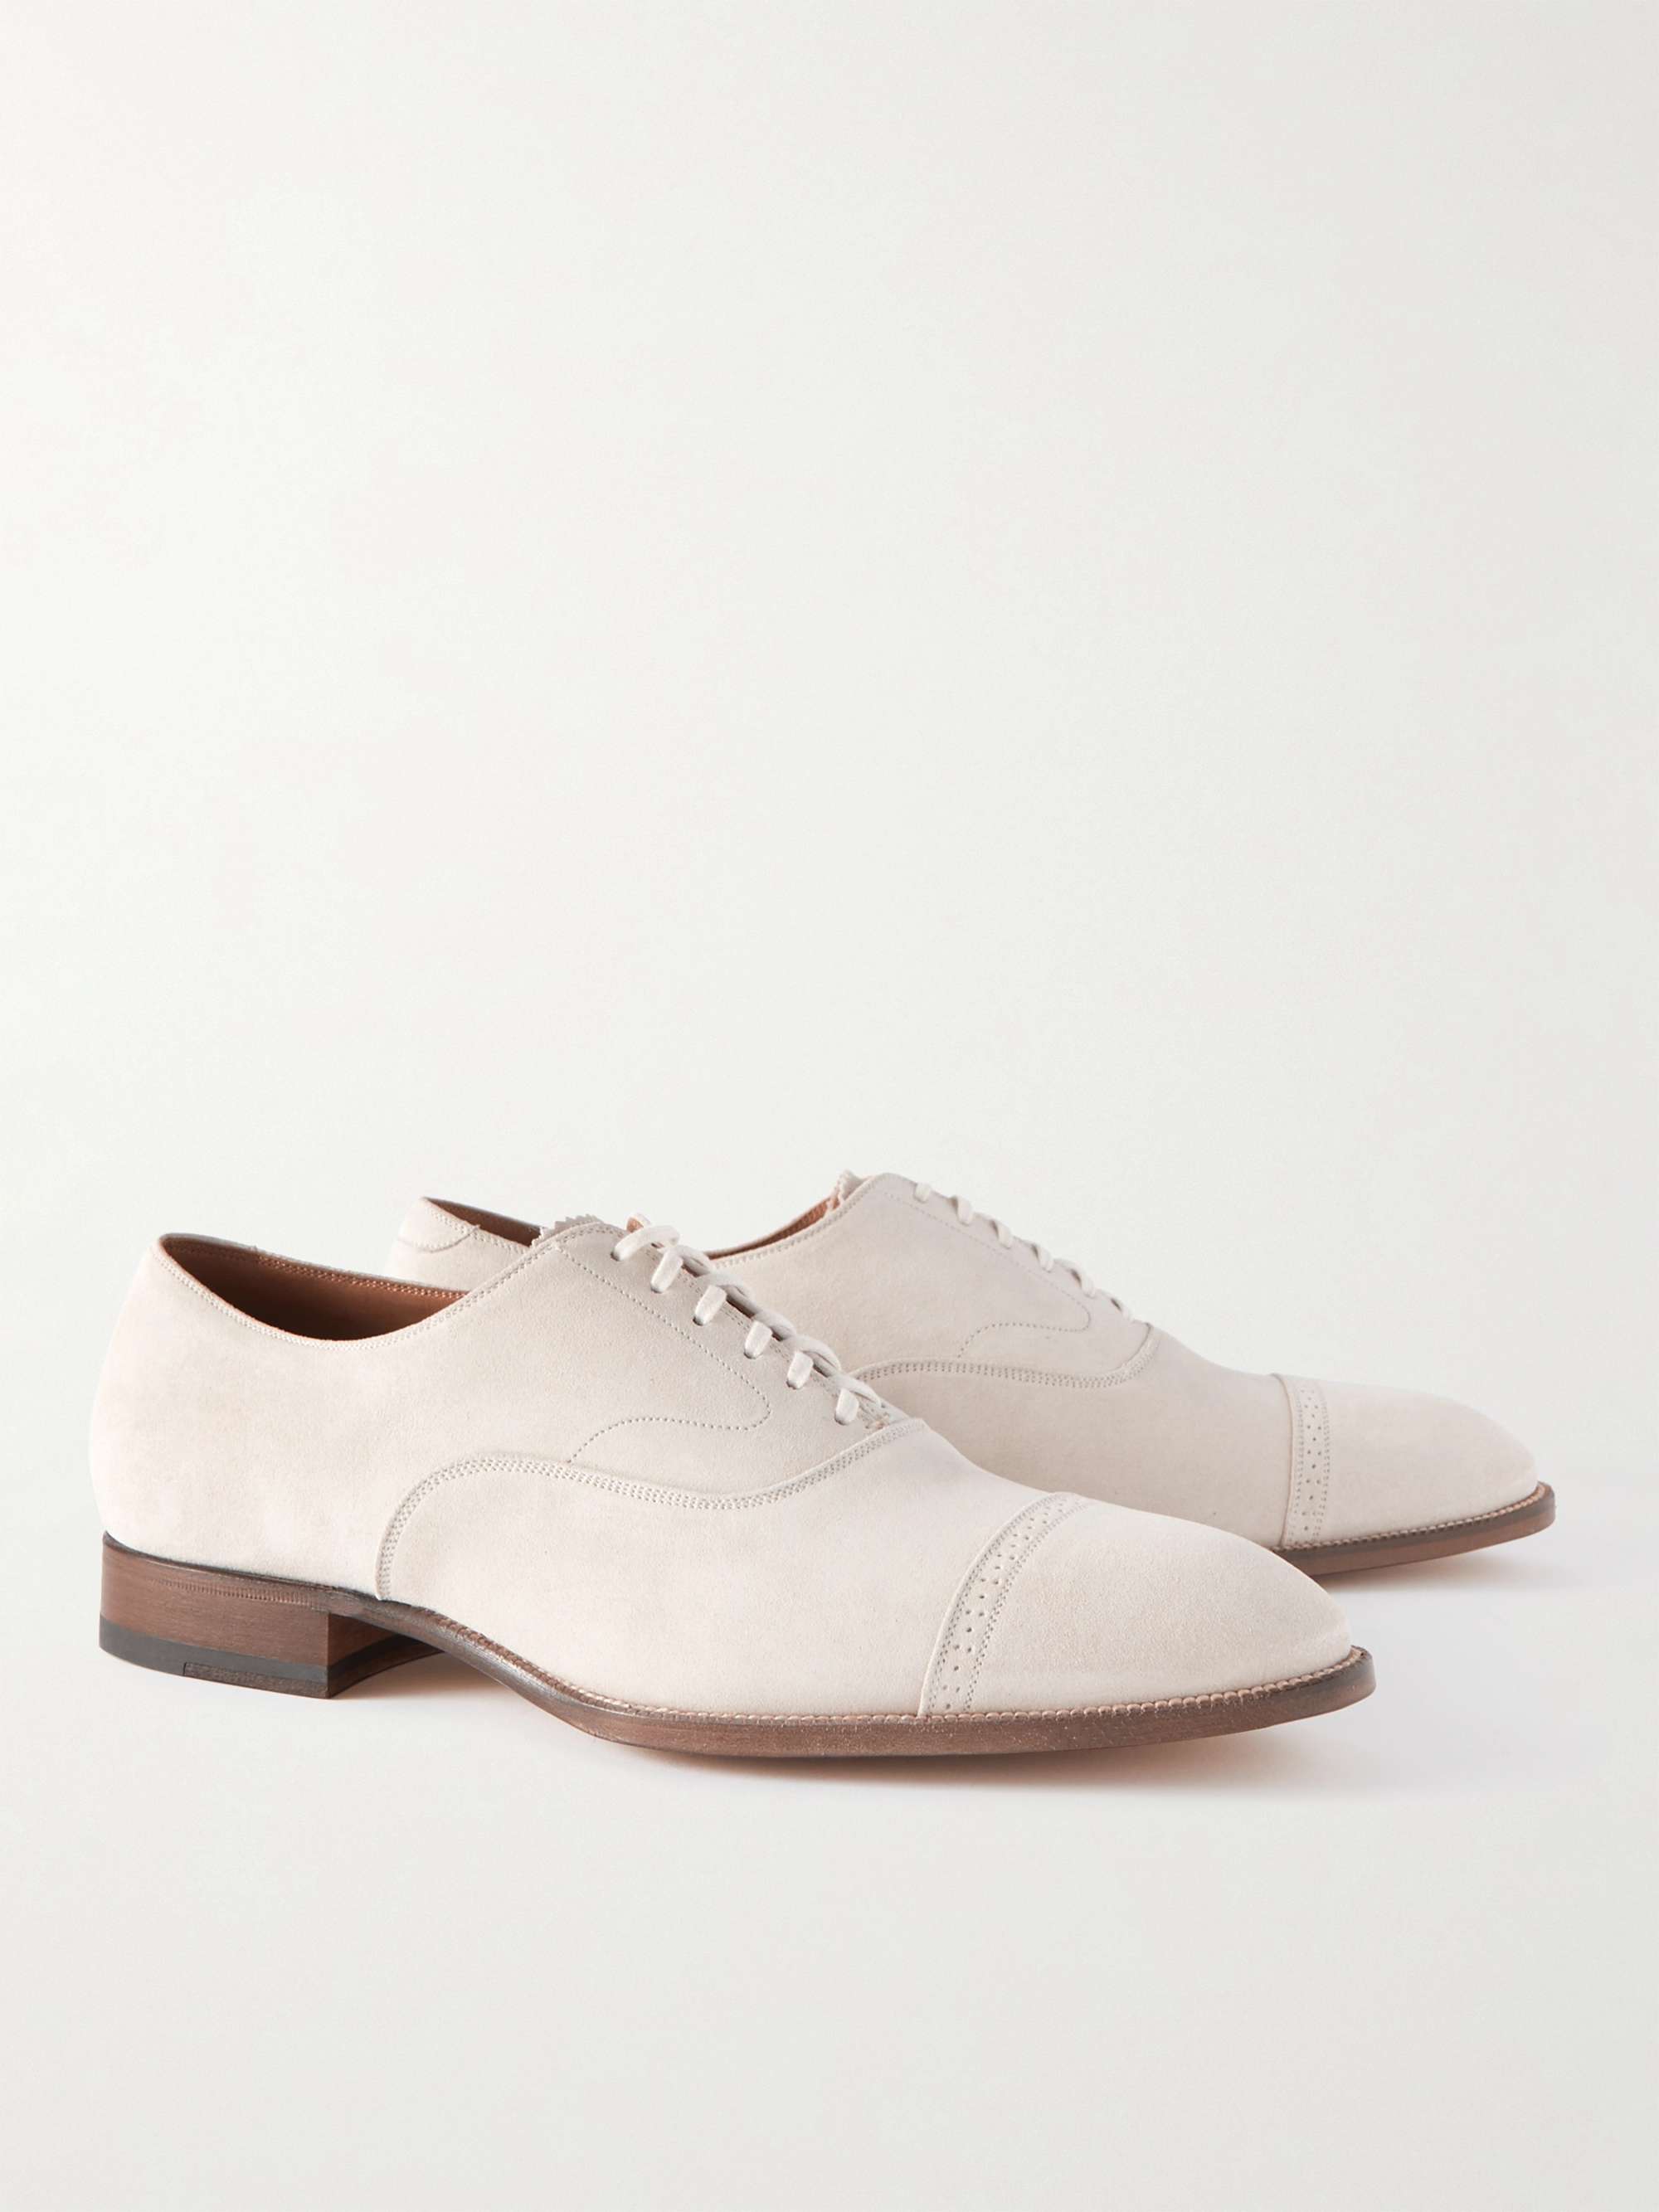 TOM FORD Suede Oxford Brogues